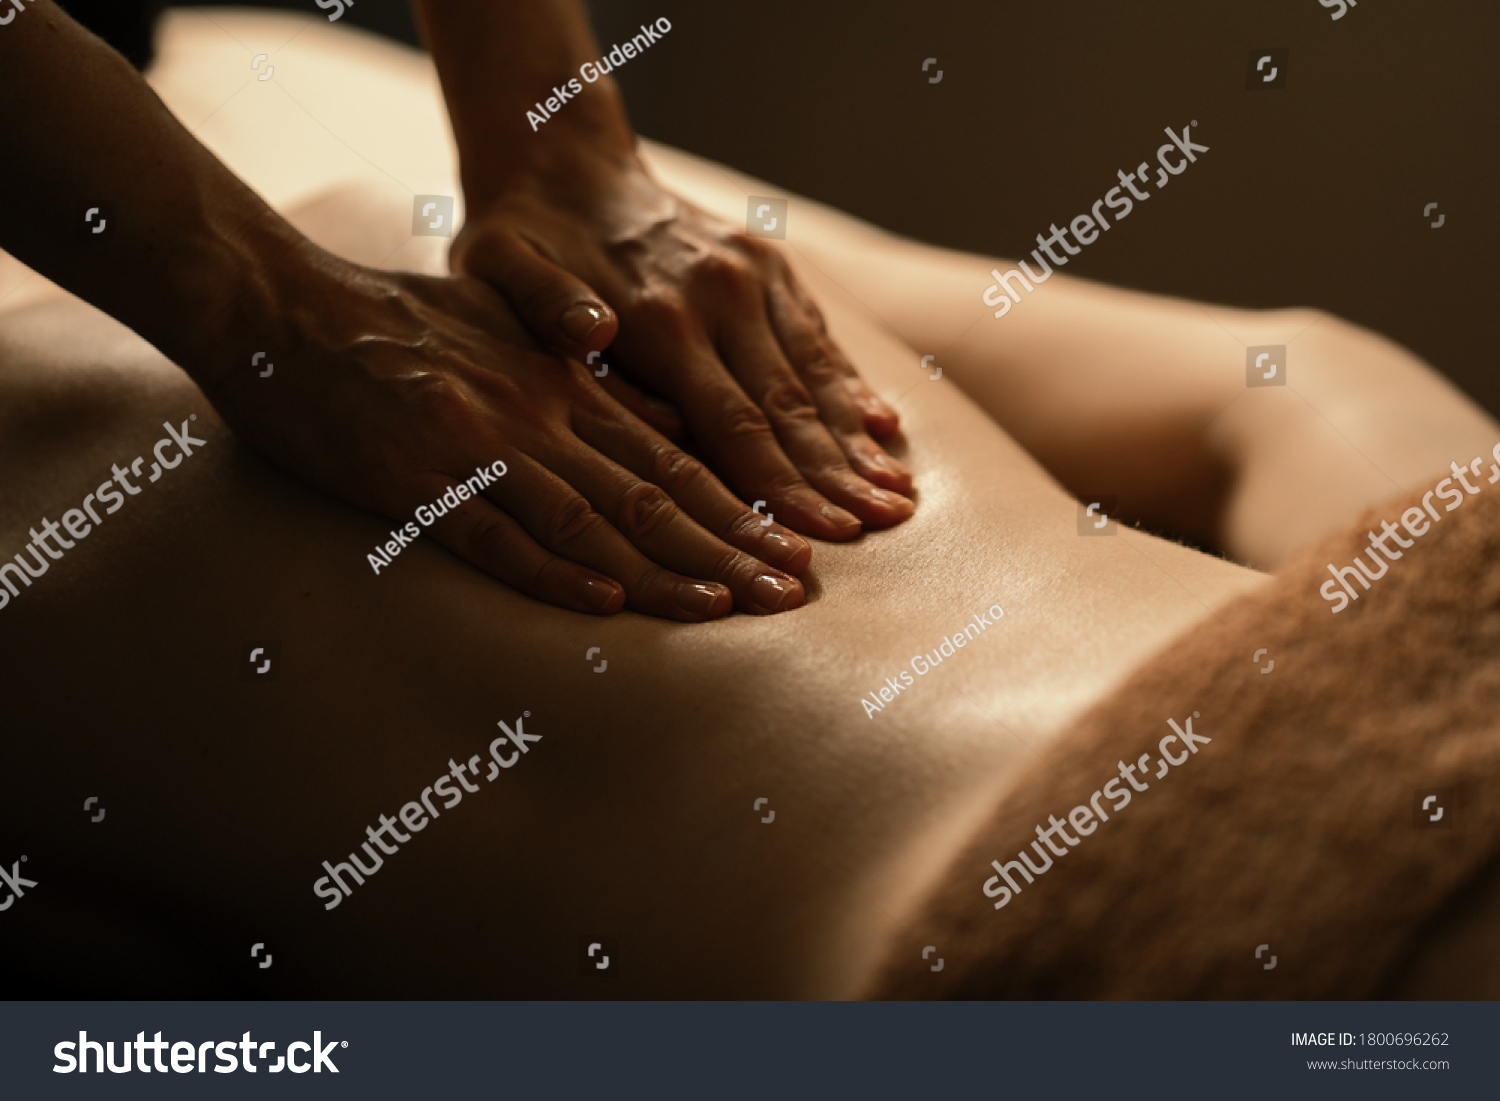 The beautiful girl has massage. Authentic image of luxury spa treatment. Warm colors, charming light. #1800696262